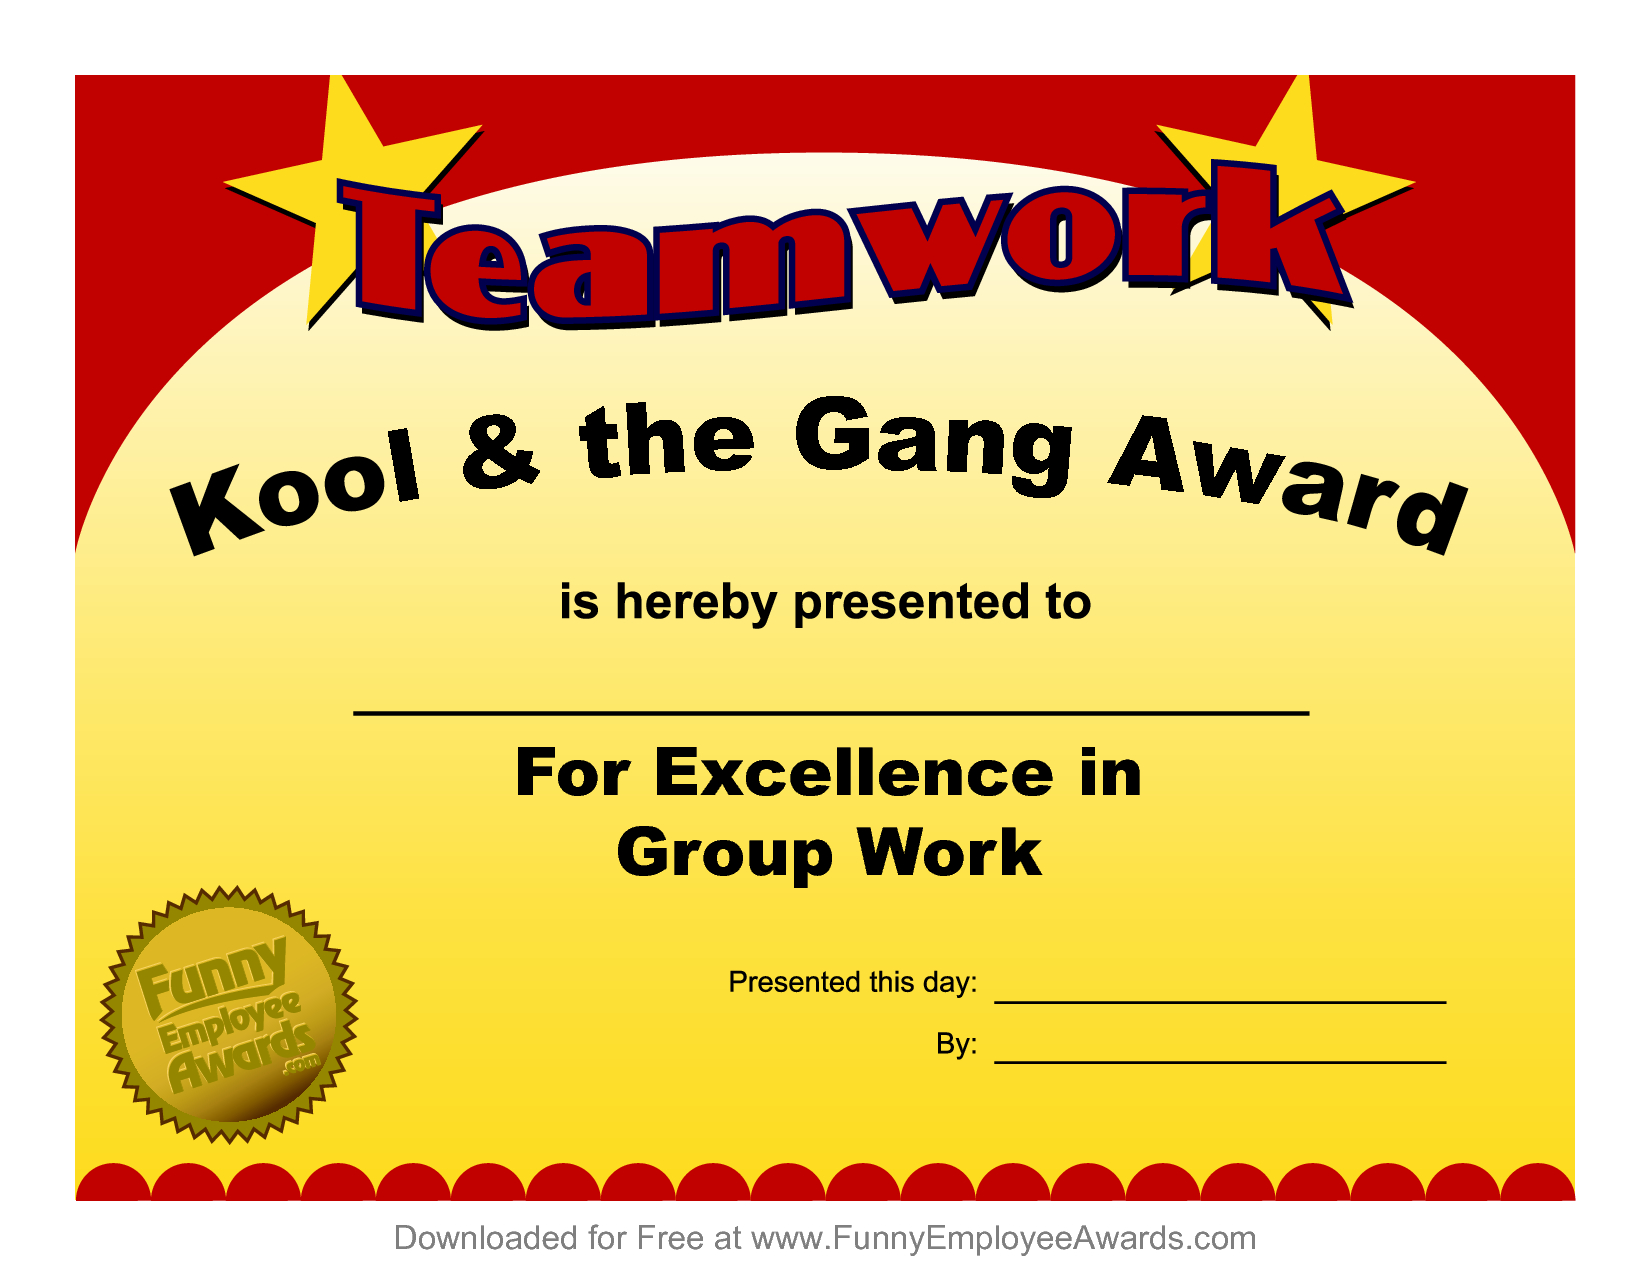 Fun Award Templatefree Employee Award Certificate Templates Pdf intended for Funny Certificates For Employees Templates